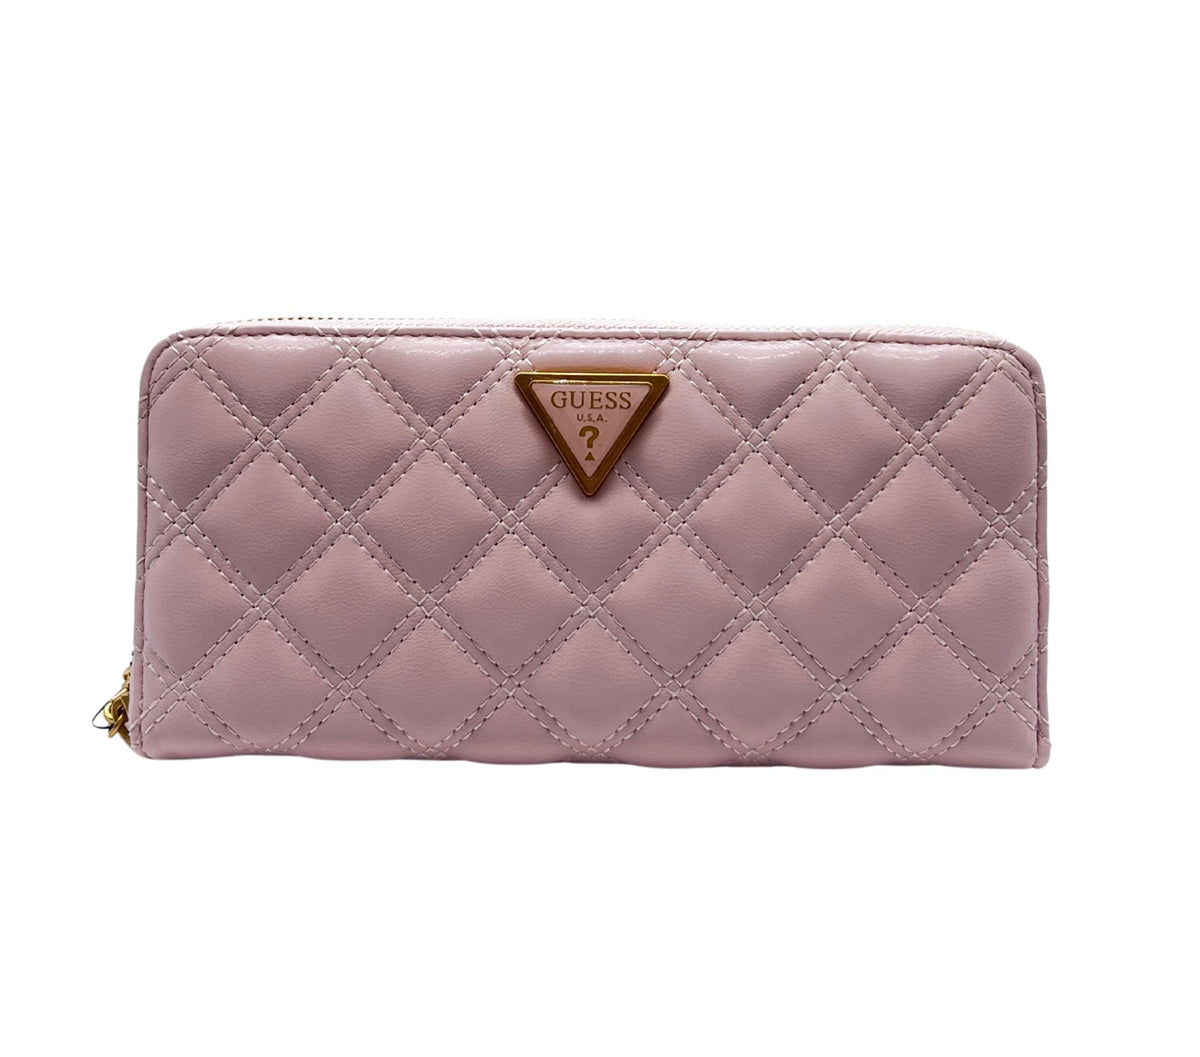 Guess Quilted Light Rose Purse